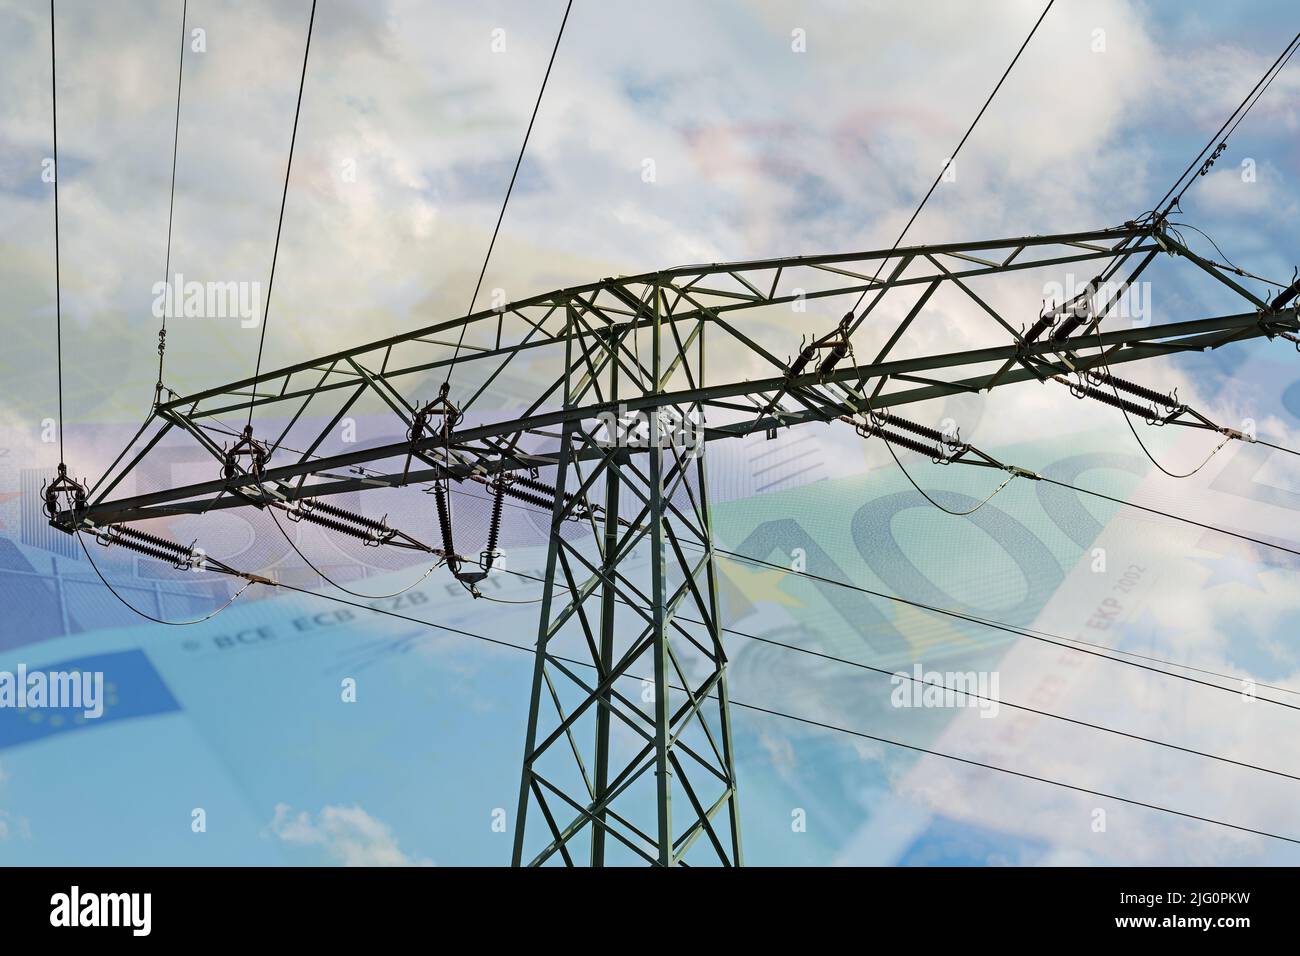 Power pole and banknotes in the background, symbolic of energy costs Stock Photo